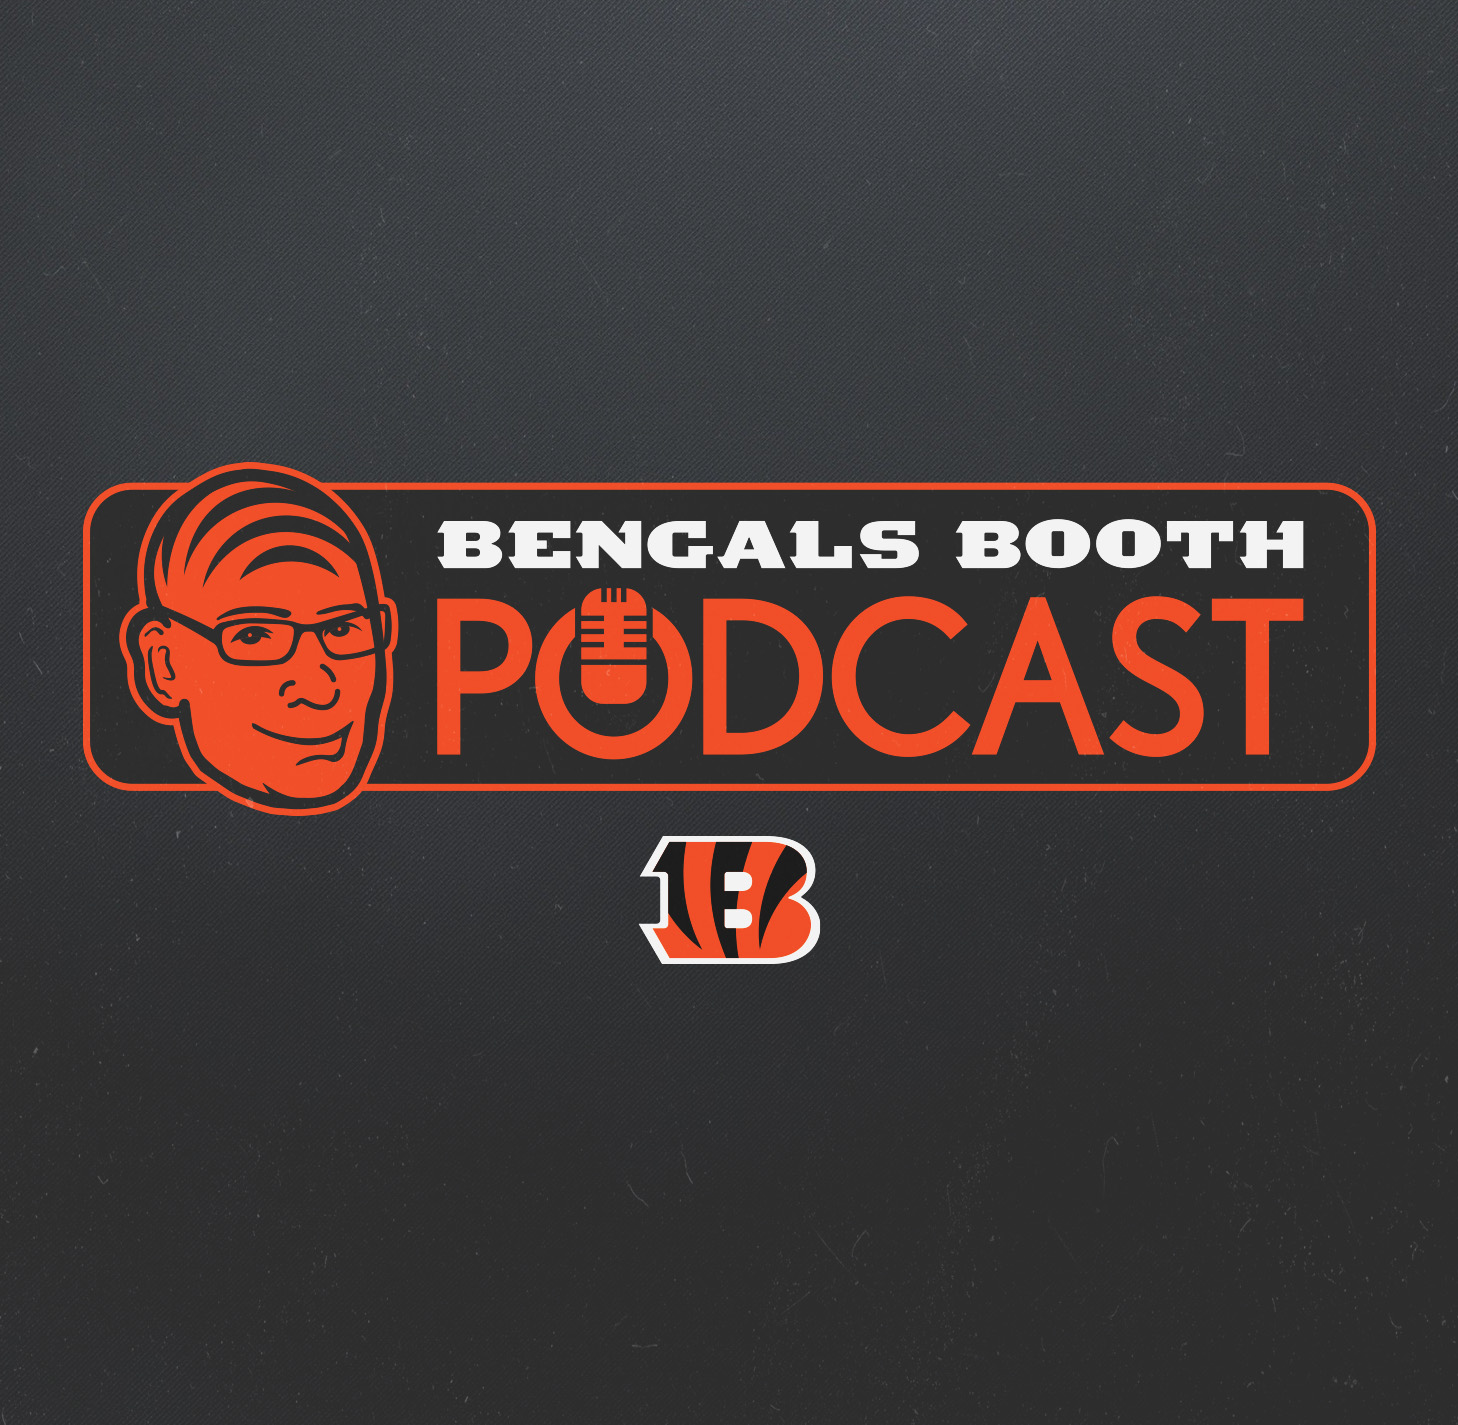 Bengals Booth Podcast: Thriller